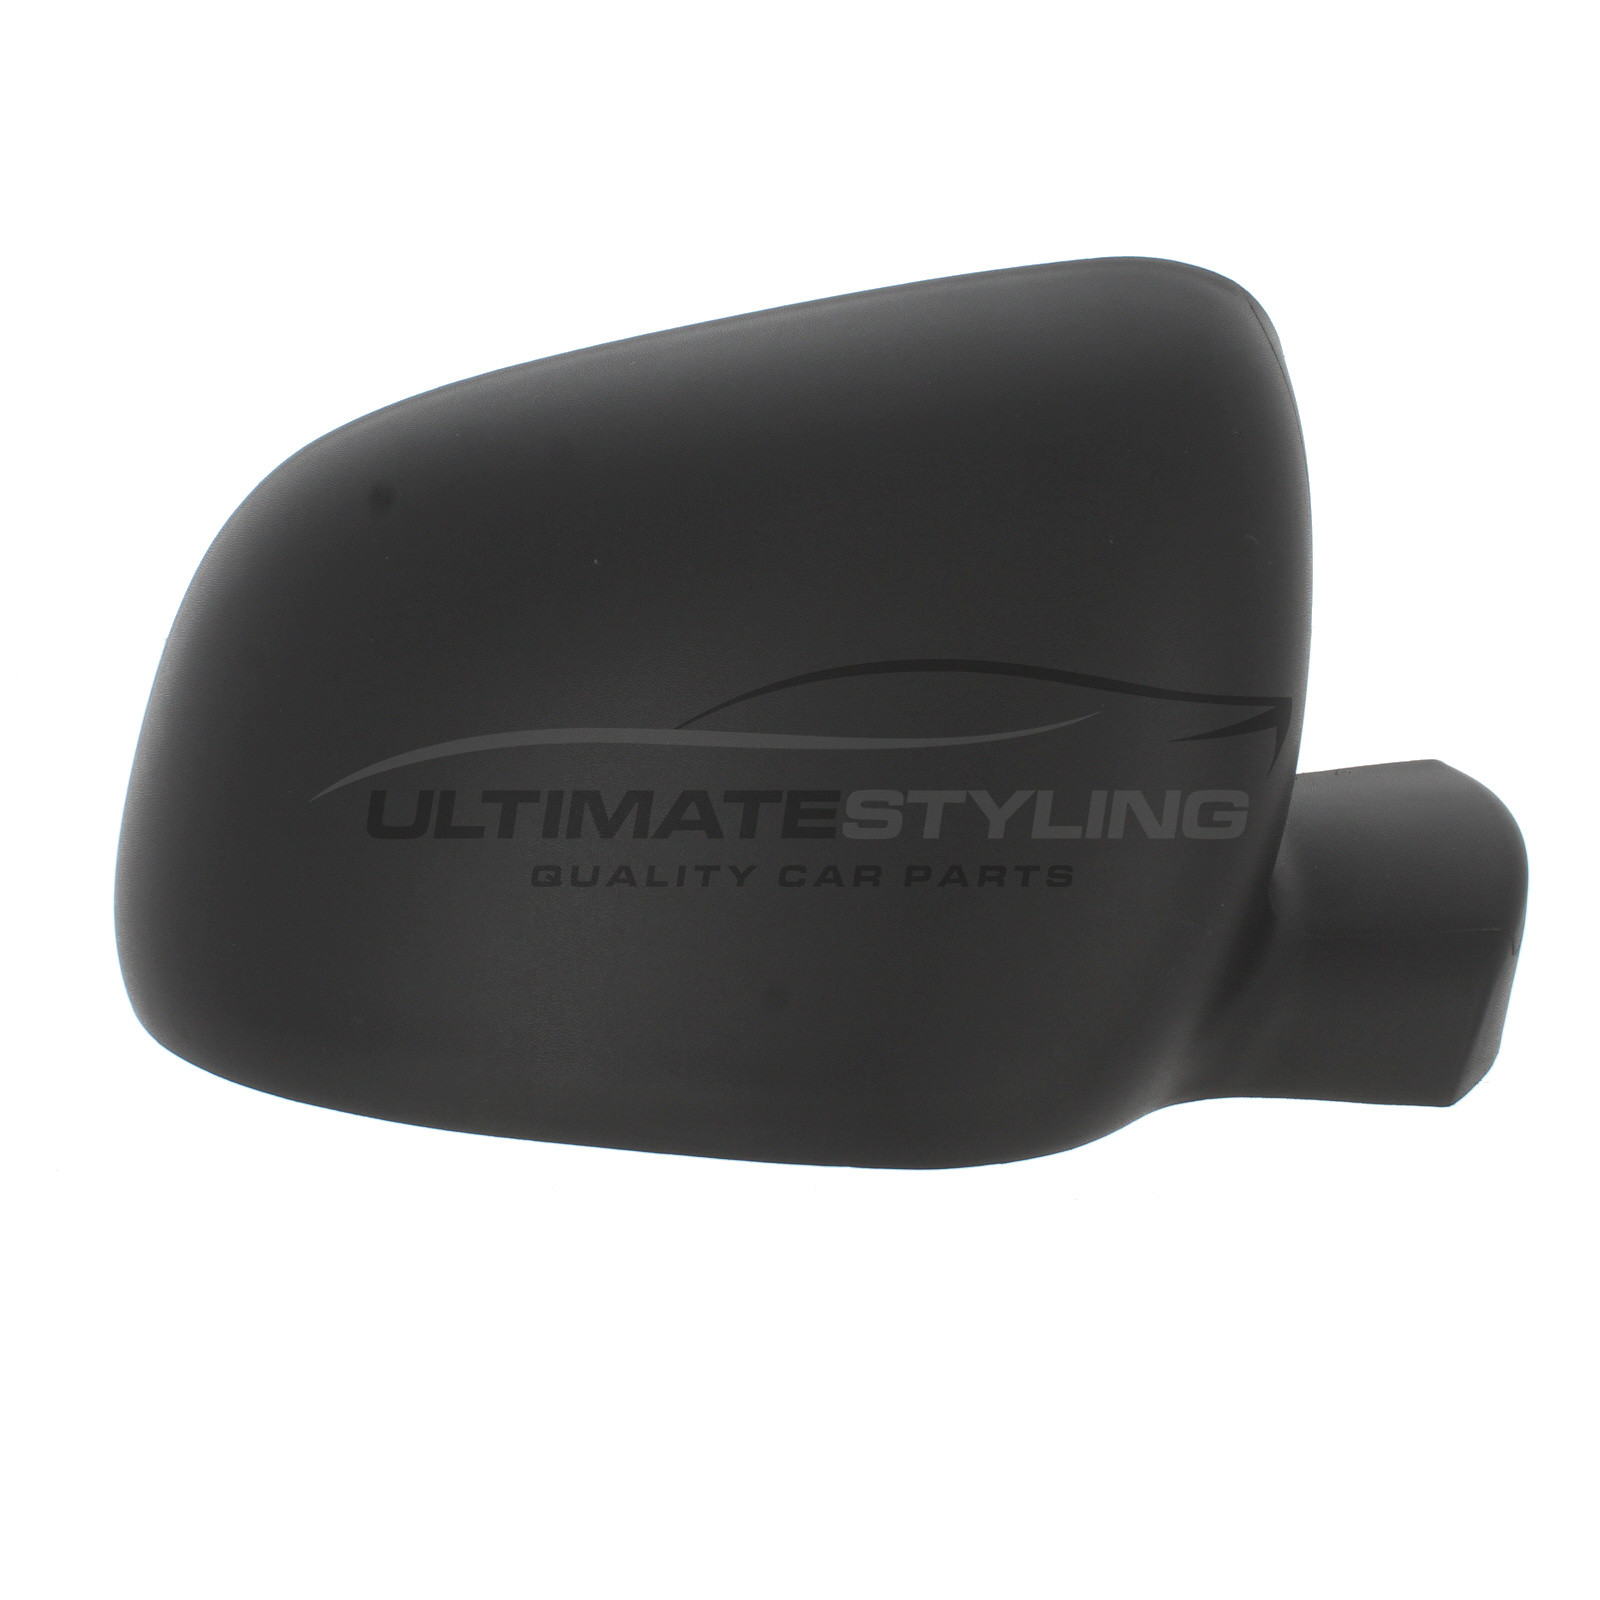 Vauxhall Movano 2010->, Mercedes Benz Citan 2012-2021, Nissan NV250 2019-2022 Wing Mirror Cover Cap Casing Black (Textured) Drivers Side (RH)